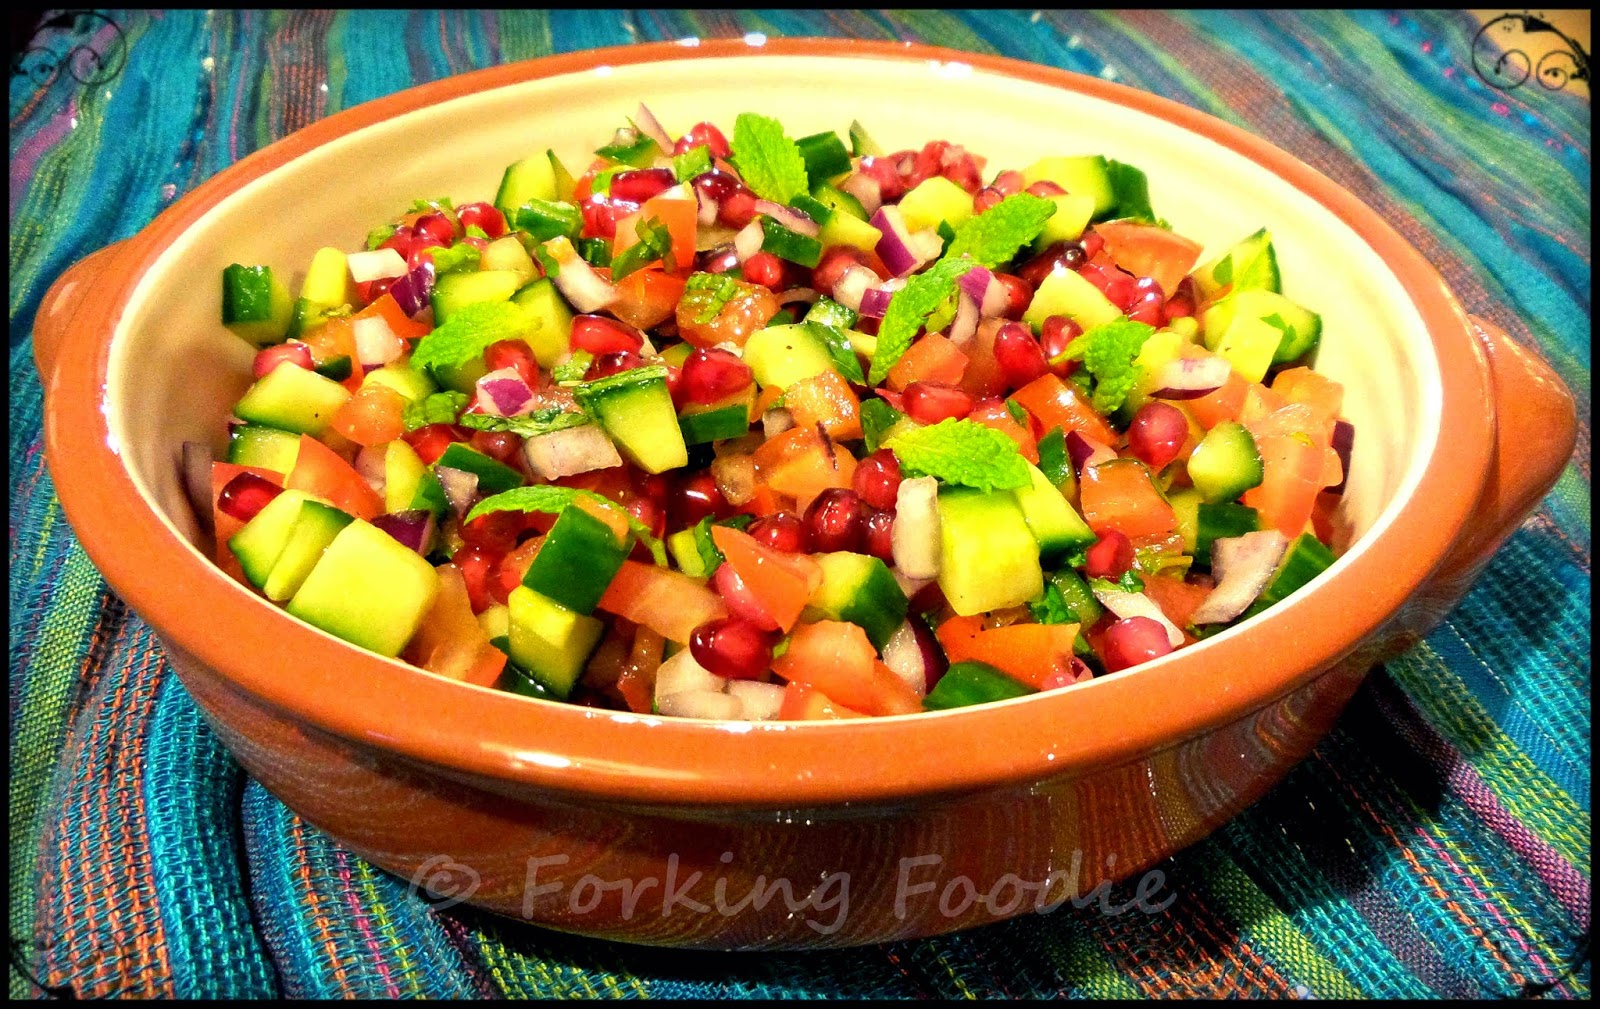 Forking Foodie: Salad Shirazi with Pomegranate Seeds